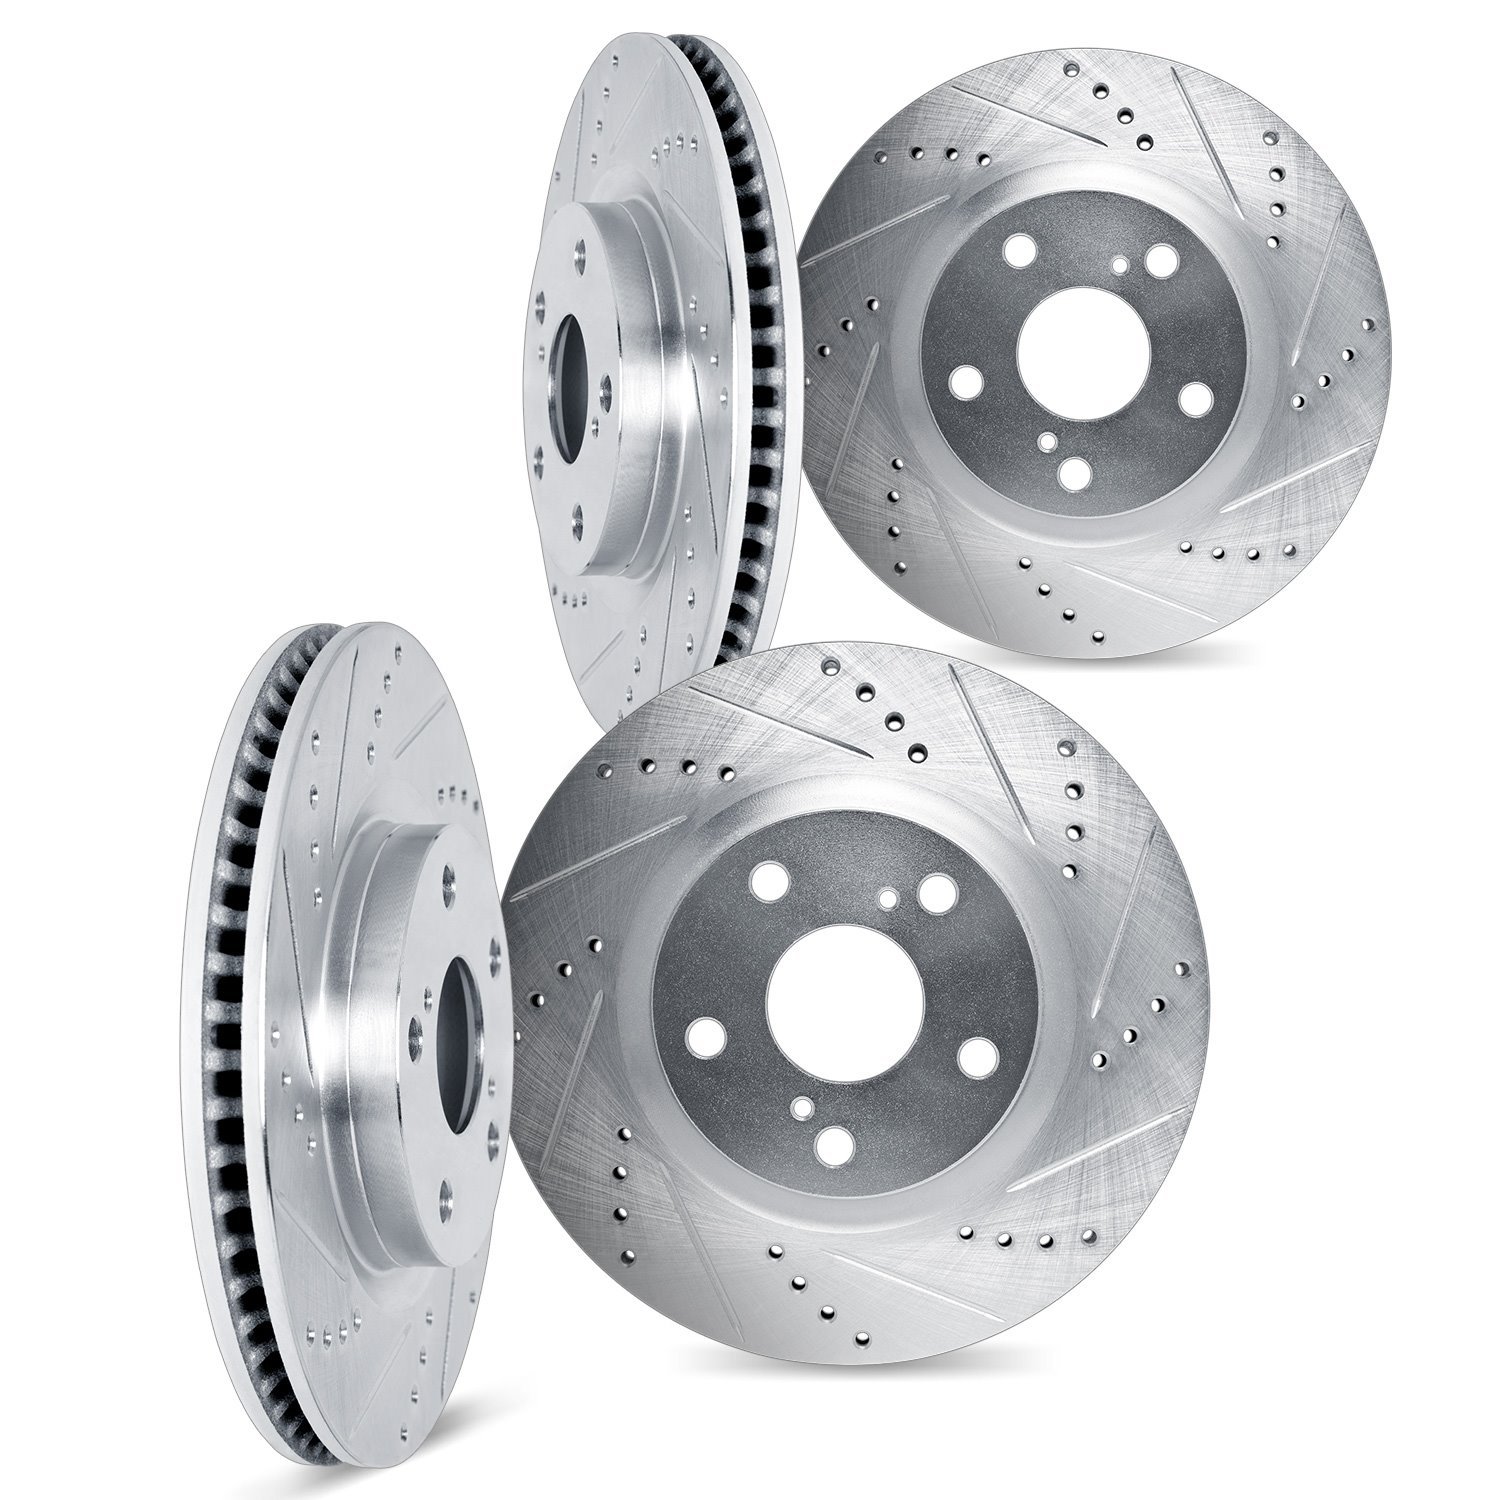 7004-20011 Drilled/Slotted Brake Rotors [Silver], 2006-2015 Jaguar, Position: Front and Rear